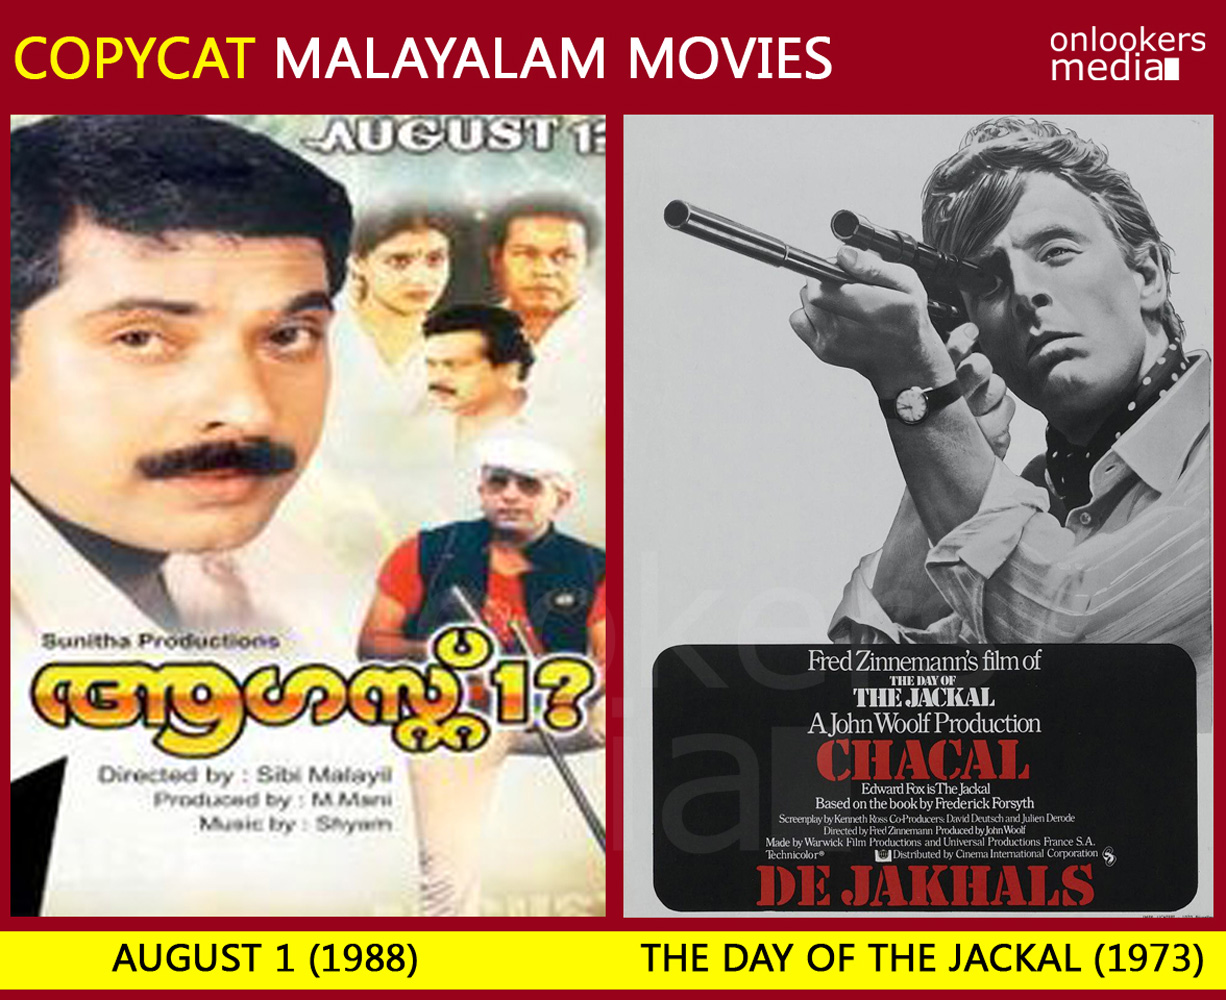 August 1 malayalam movie copied from The Day of the Jackal